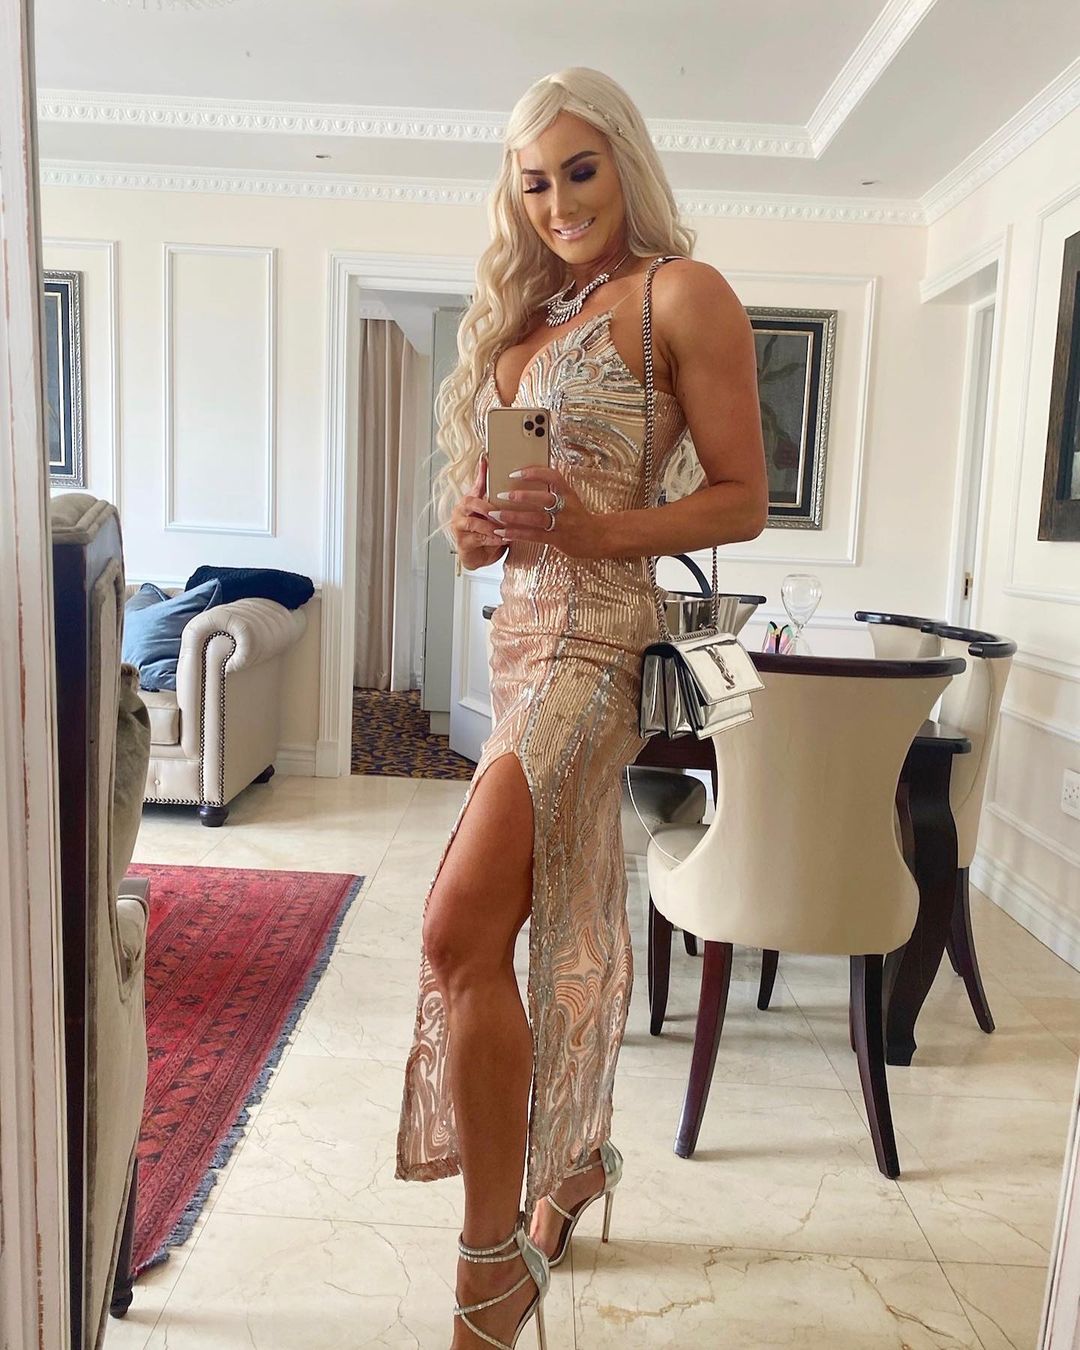 Real Housewives of Cape Town star Beverley Erika Steyn. Image: Instagram/Beverley Erika Steyn